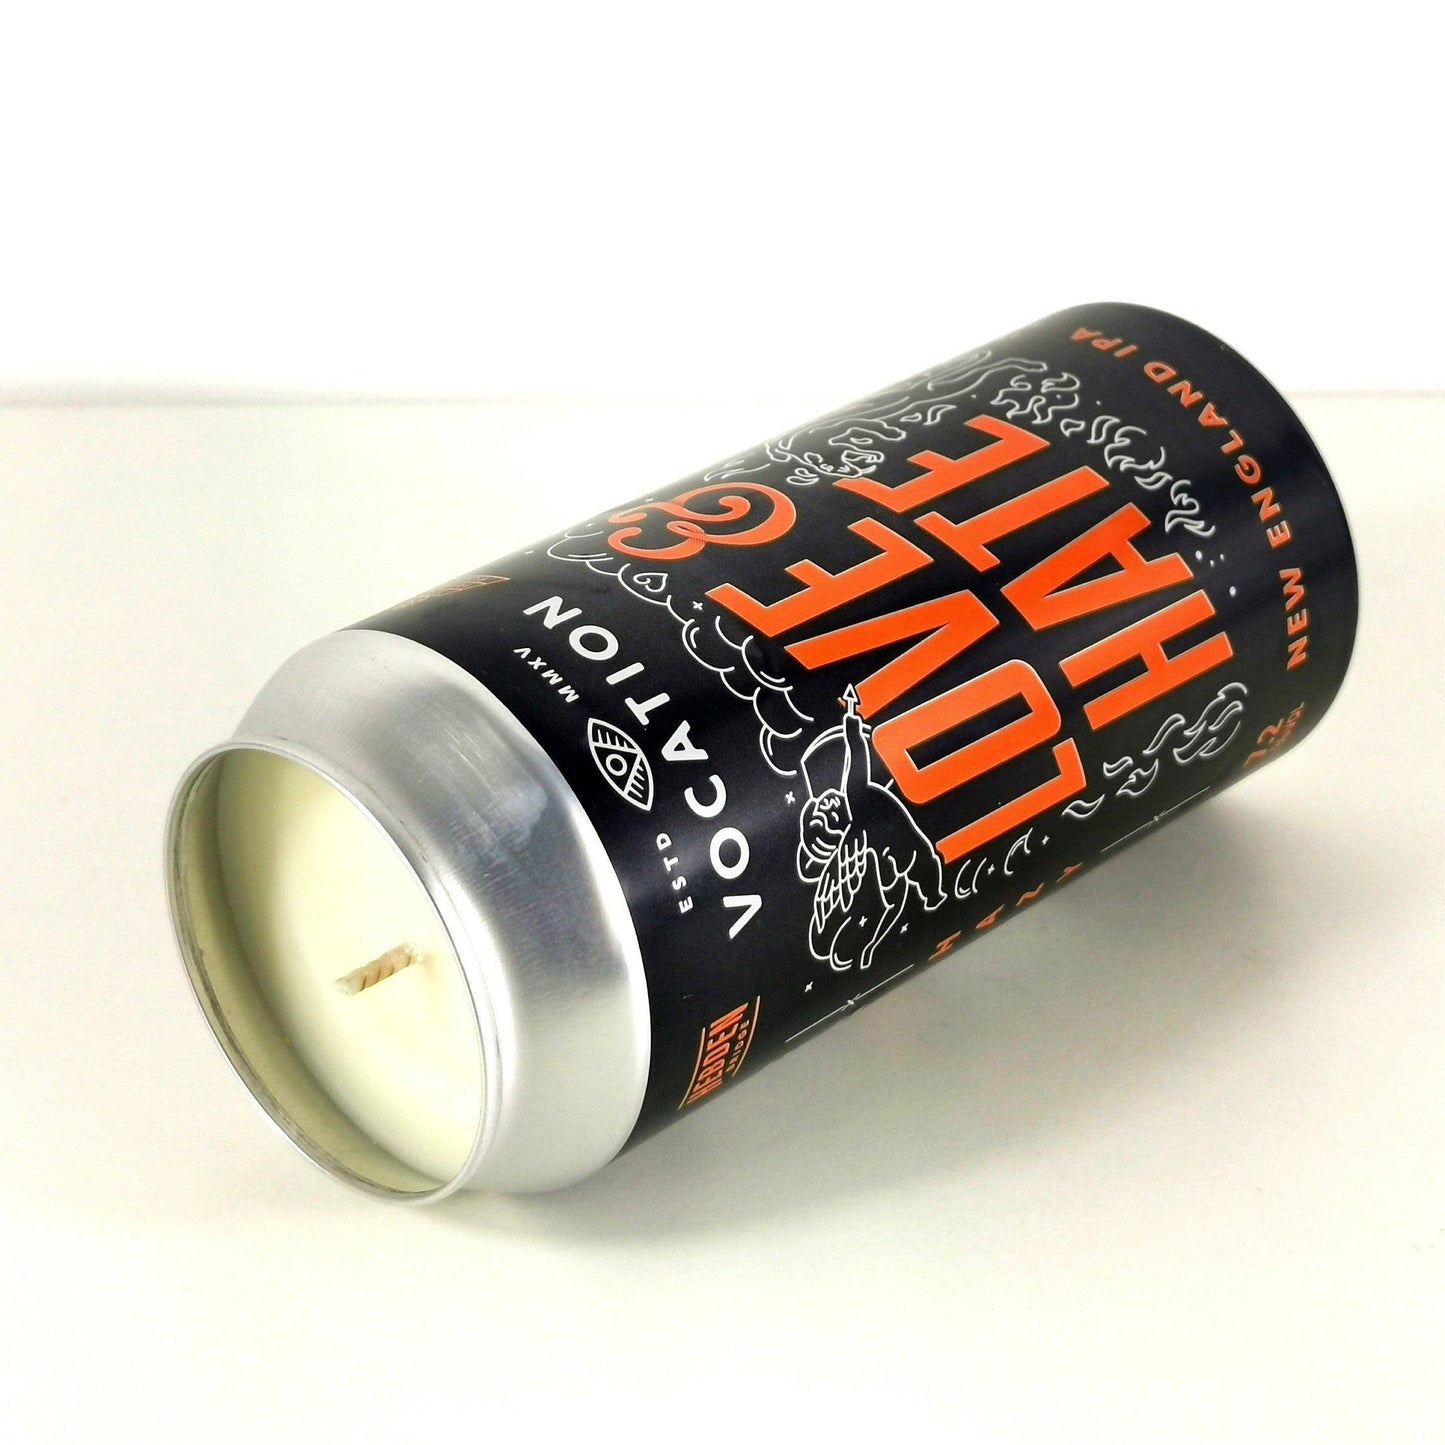 Vocation Love & Hate Craft Beer Can Candle-Beer Can Candles-Adhock Homeware